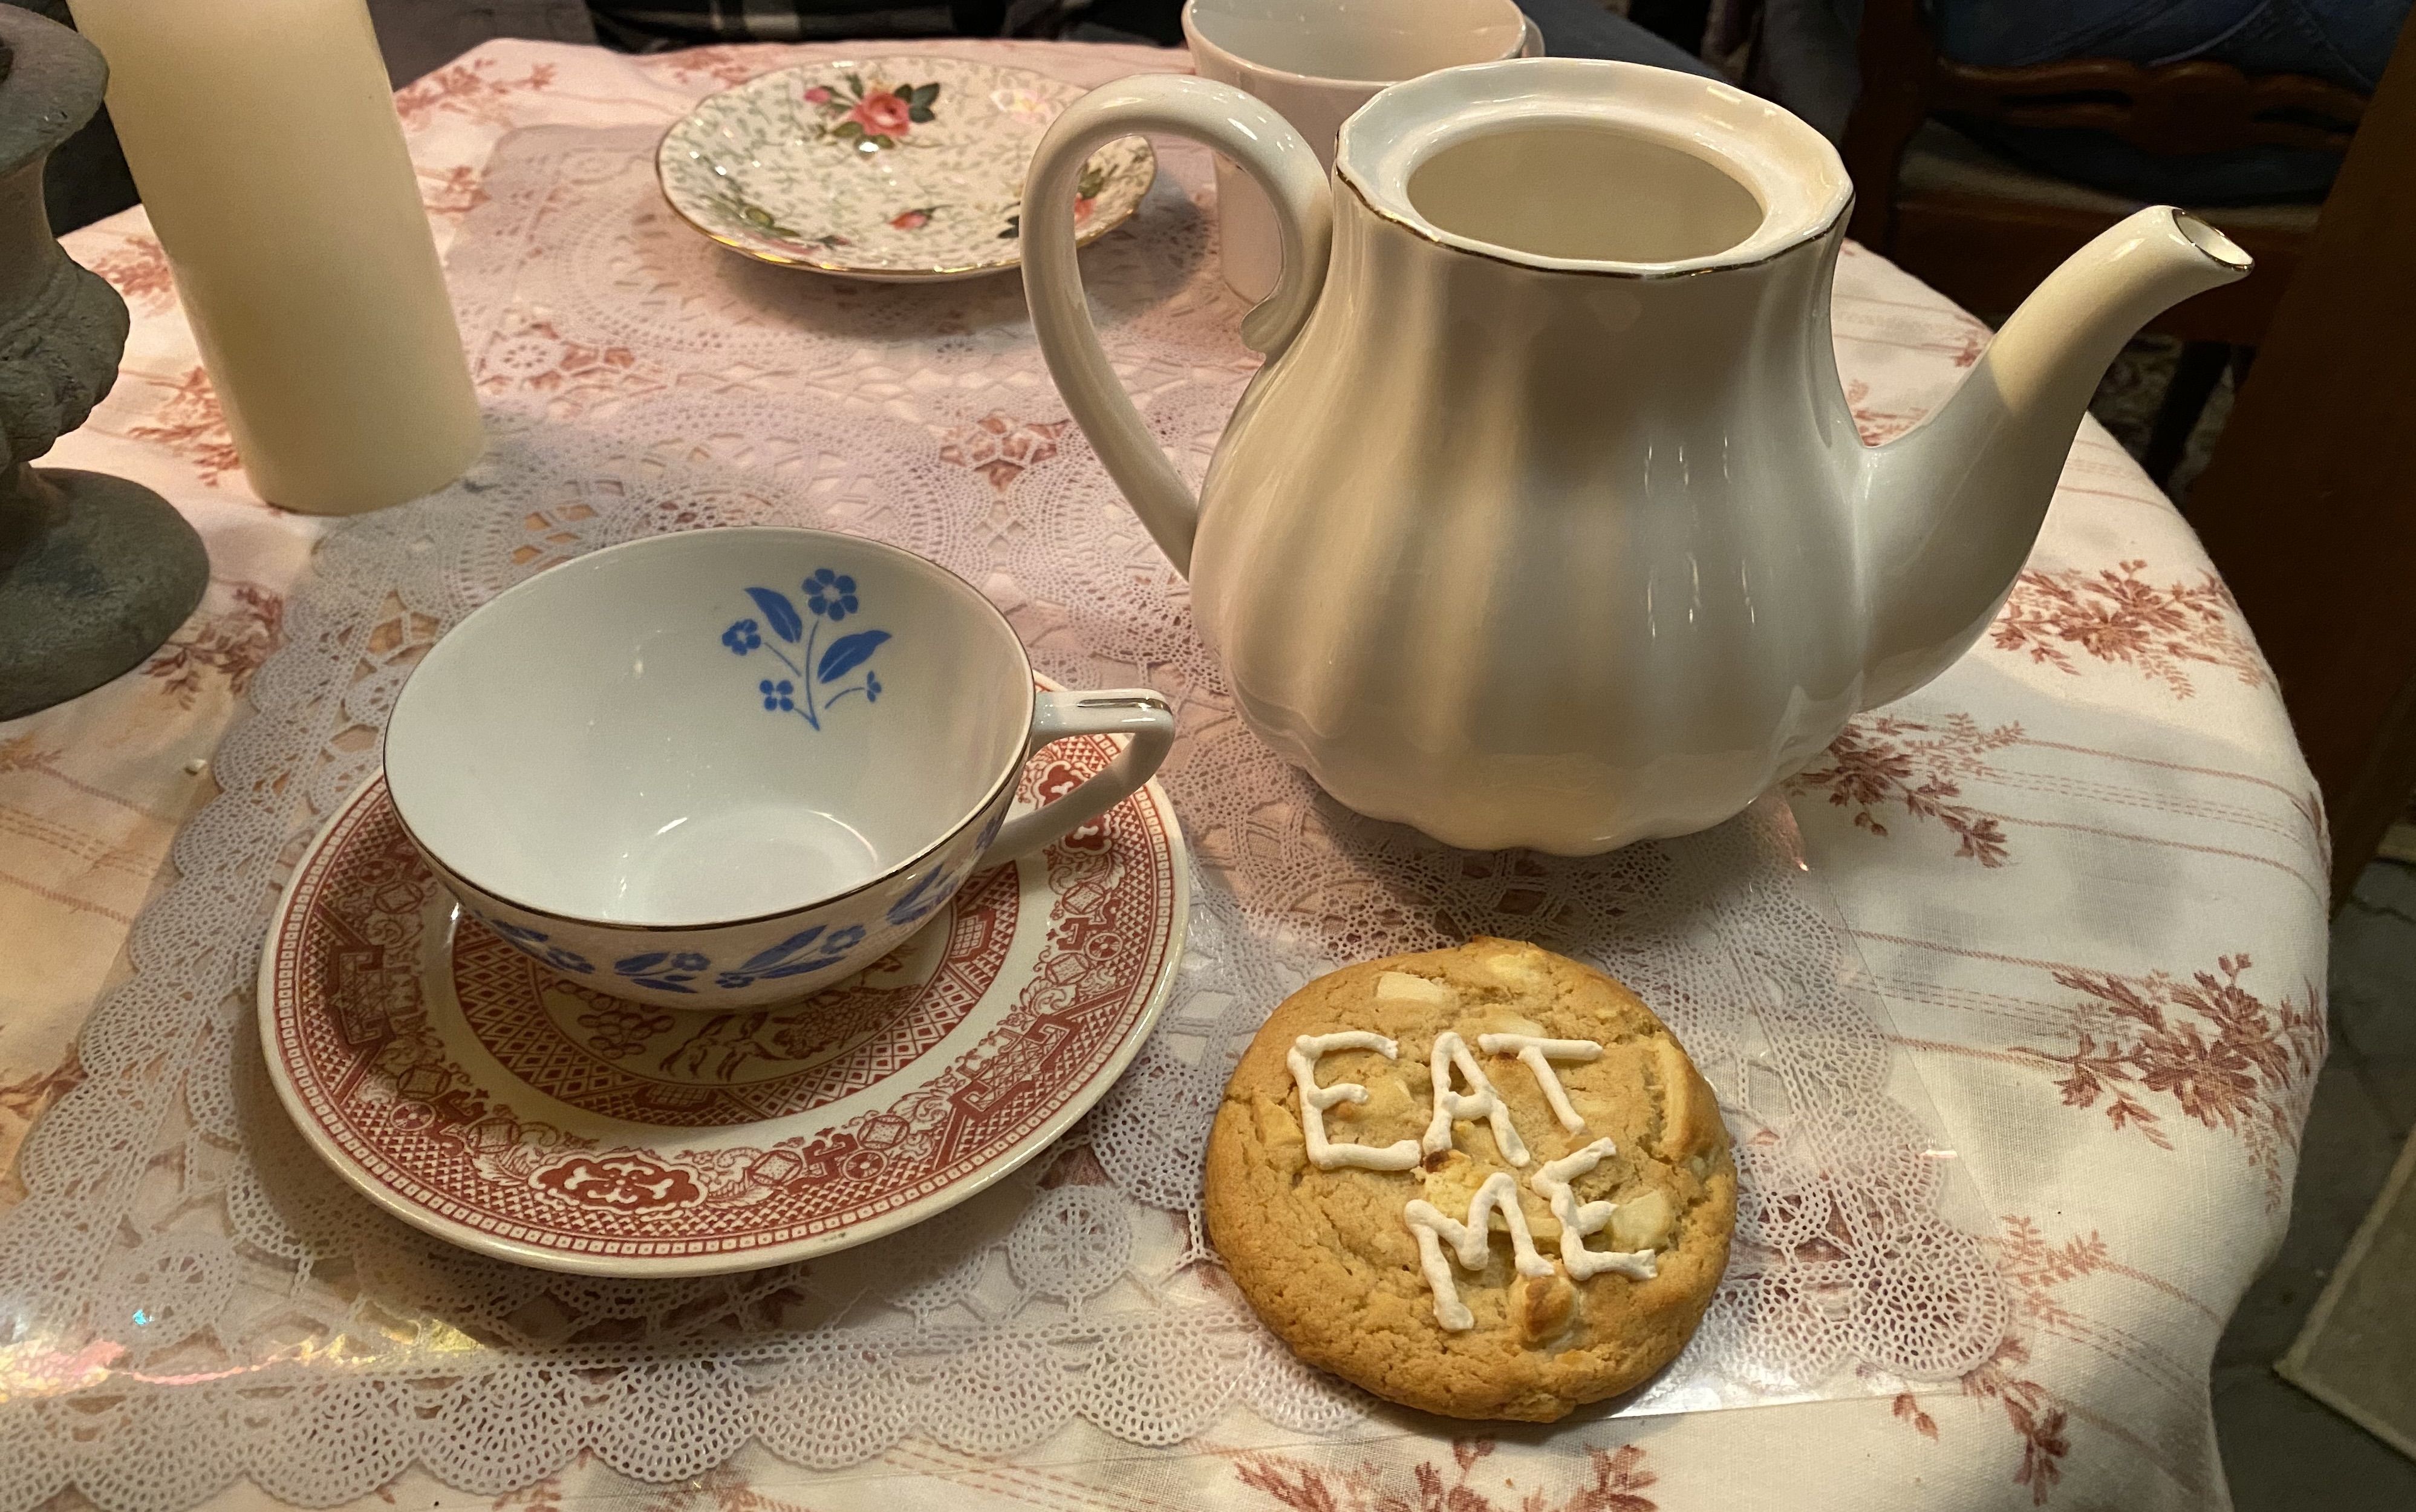 A tea set on a table next to a cookie that reads “Eat Me” in frosting